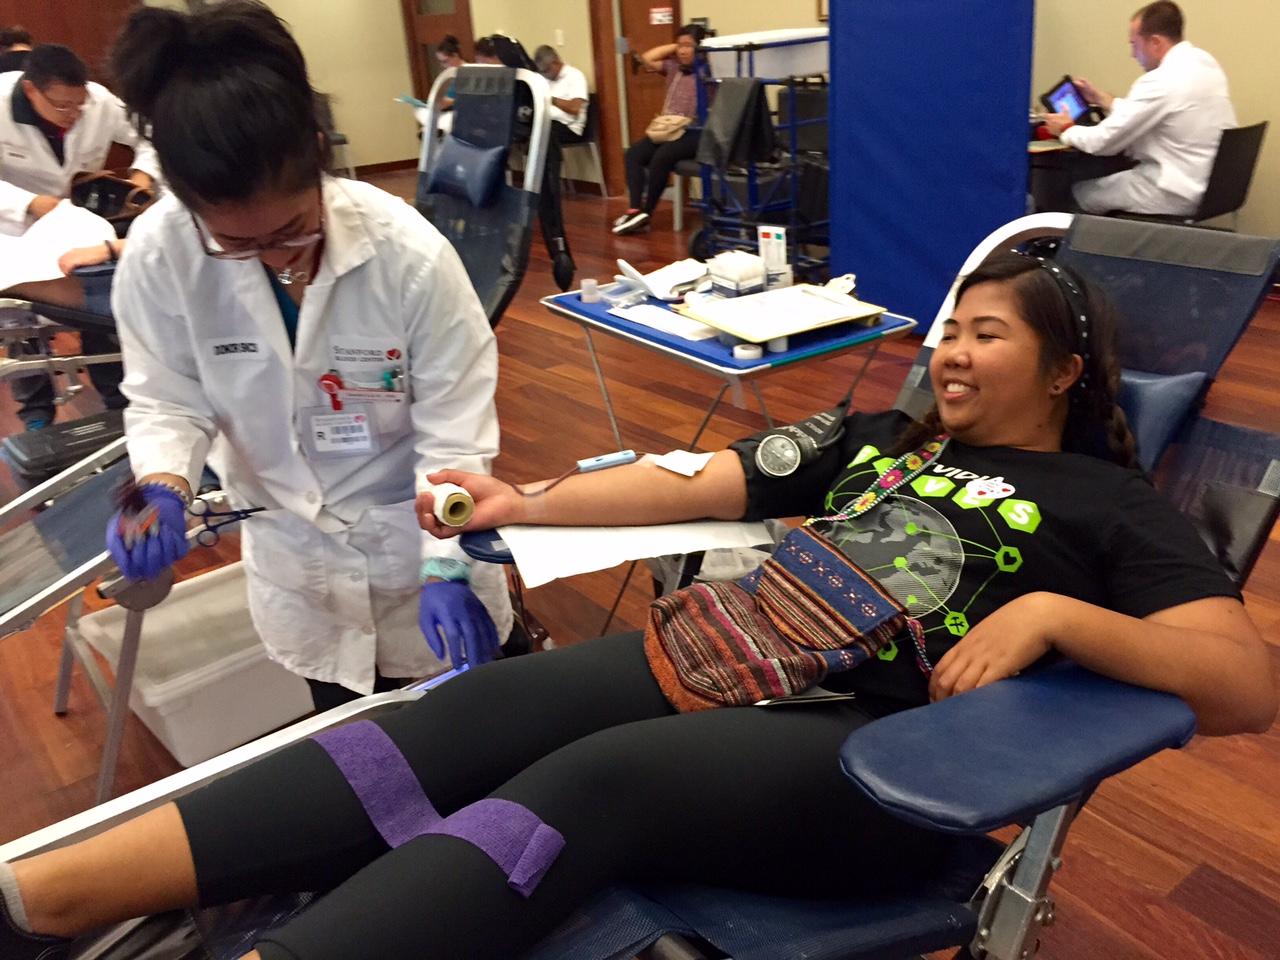 Rachelle Allauigan is donating blood in blood drive at Milpitas Public Library on Otc. 31. Allauigan decides to donate blood blood for the first time when her mother received blood and survived four years ago. 